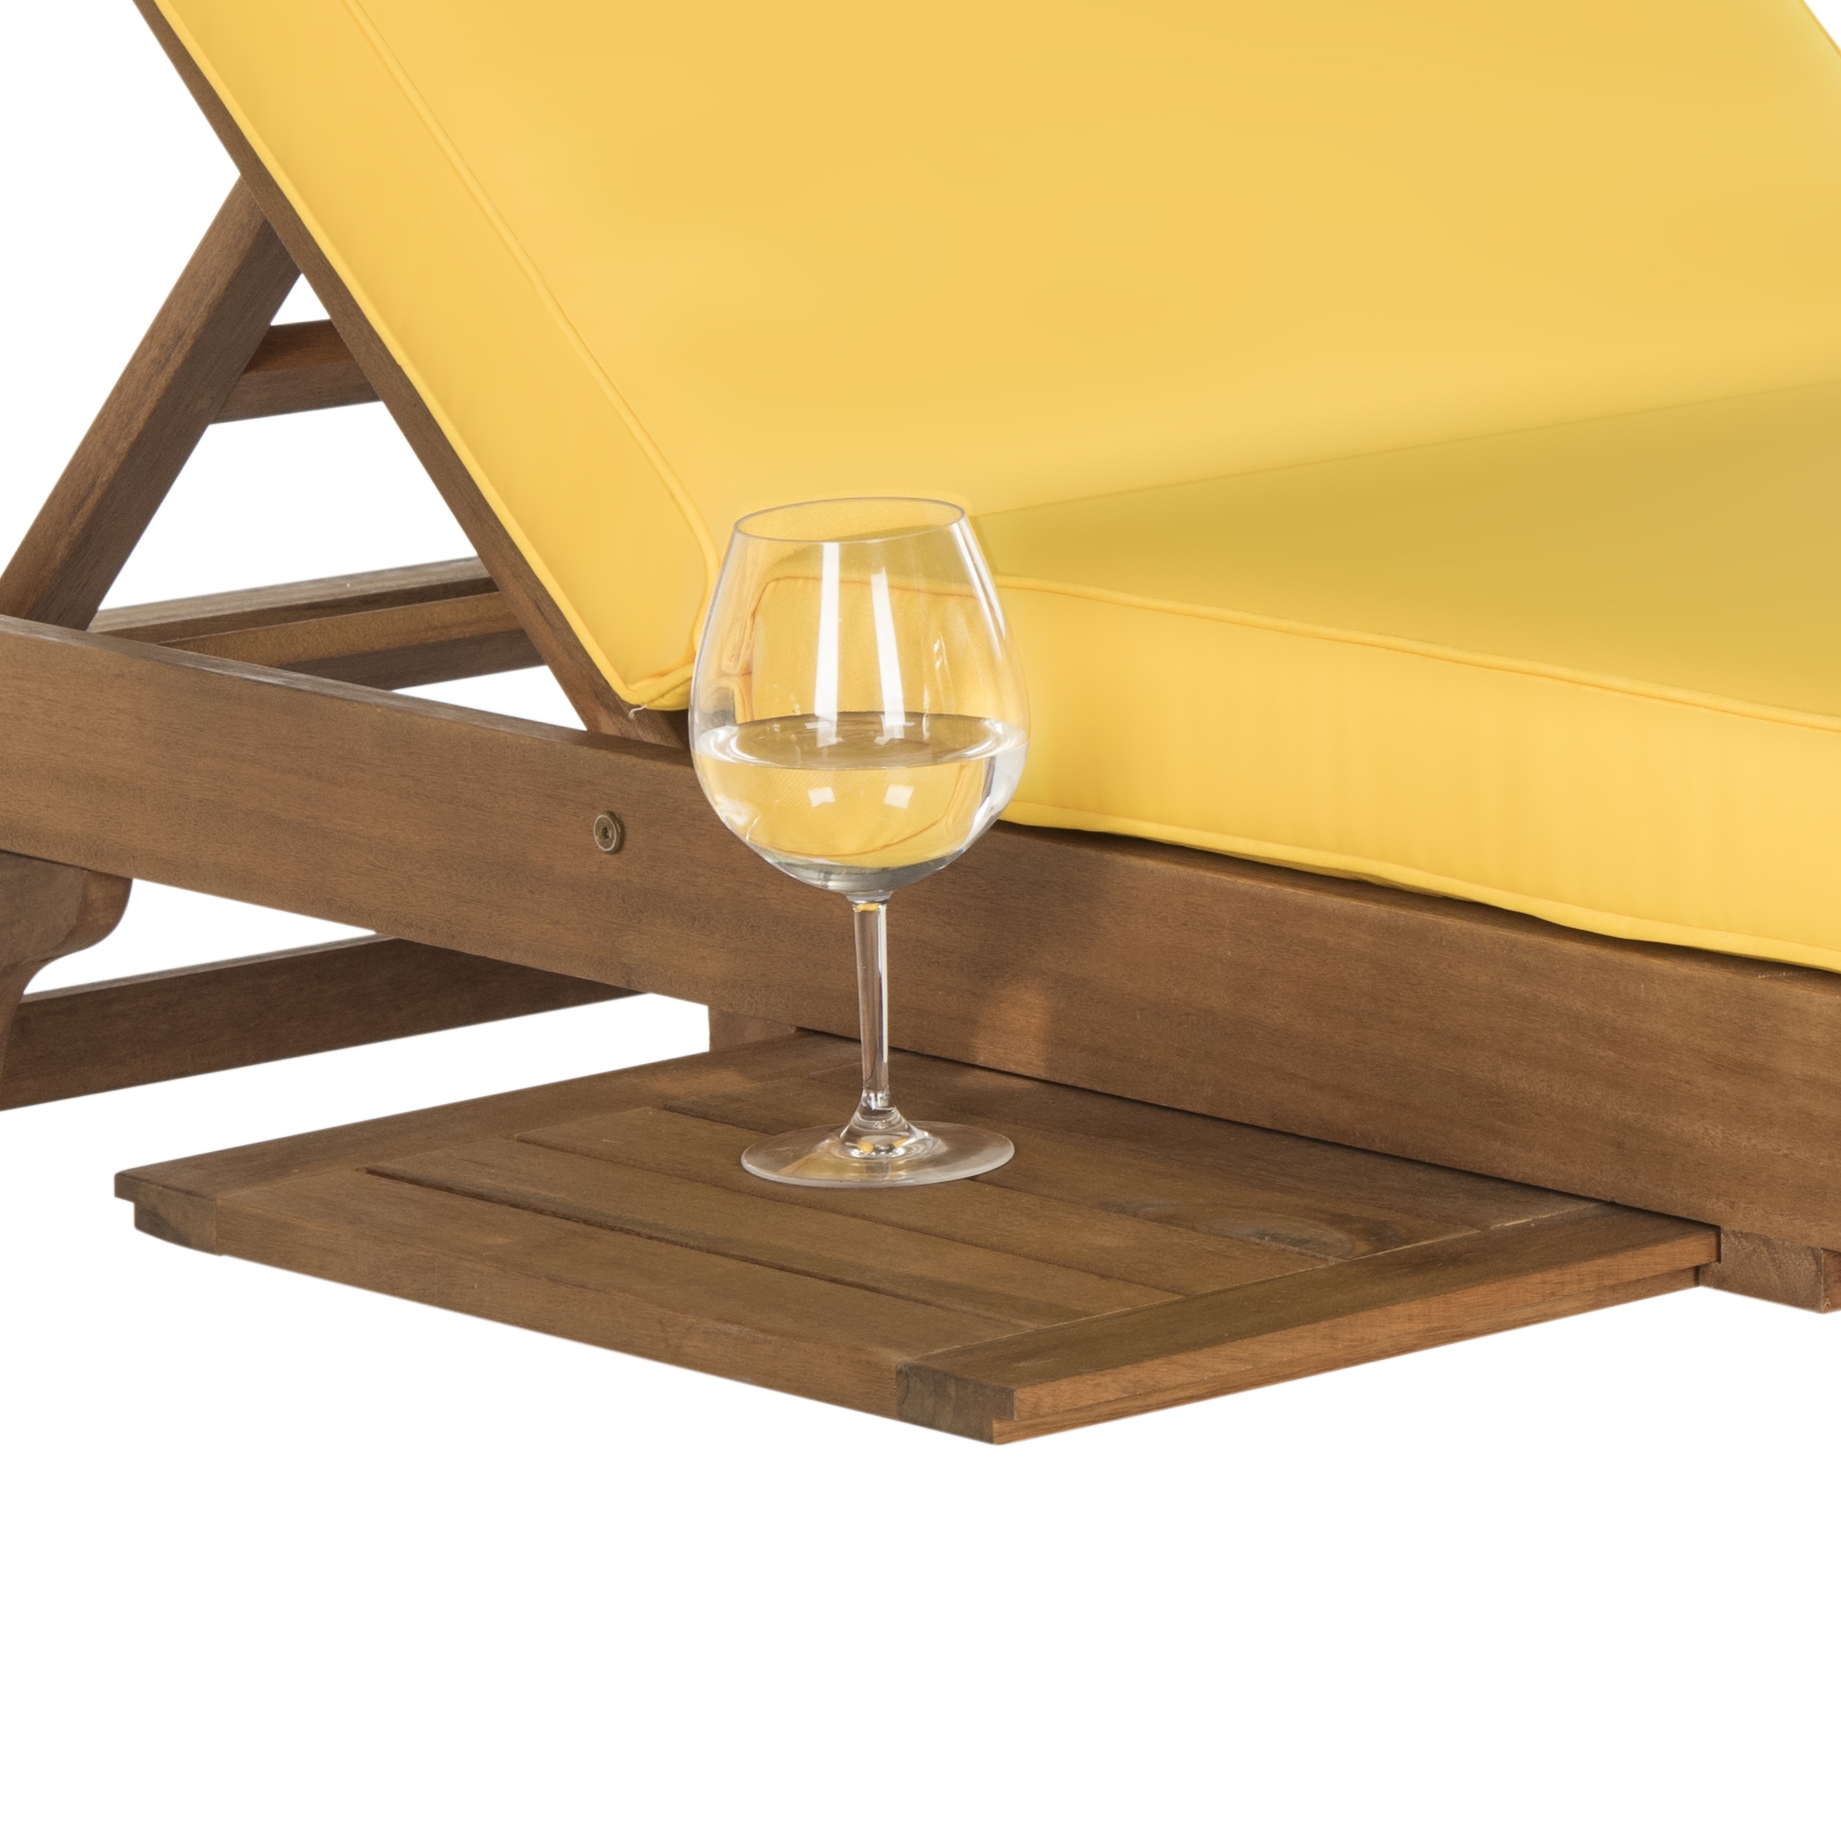 Newport Chaise Lounge Chair With Side Table - Natural/Yellow - Arlo Home - Image 4